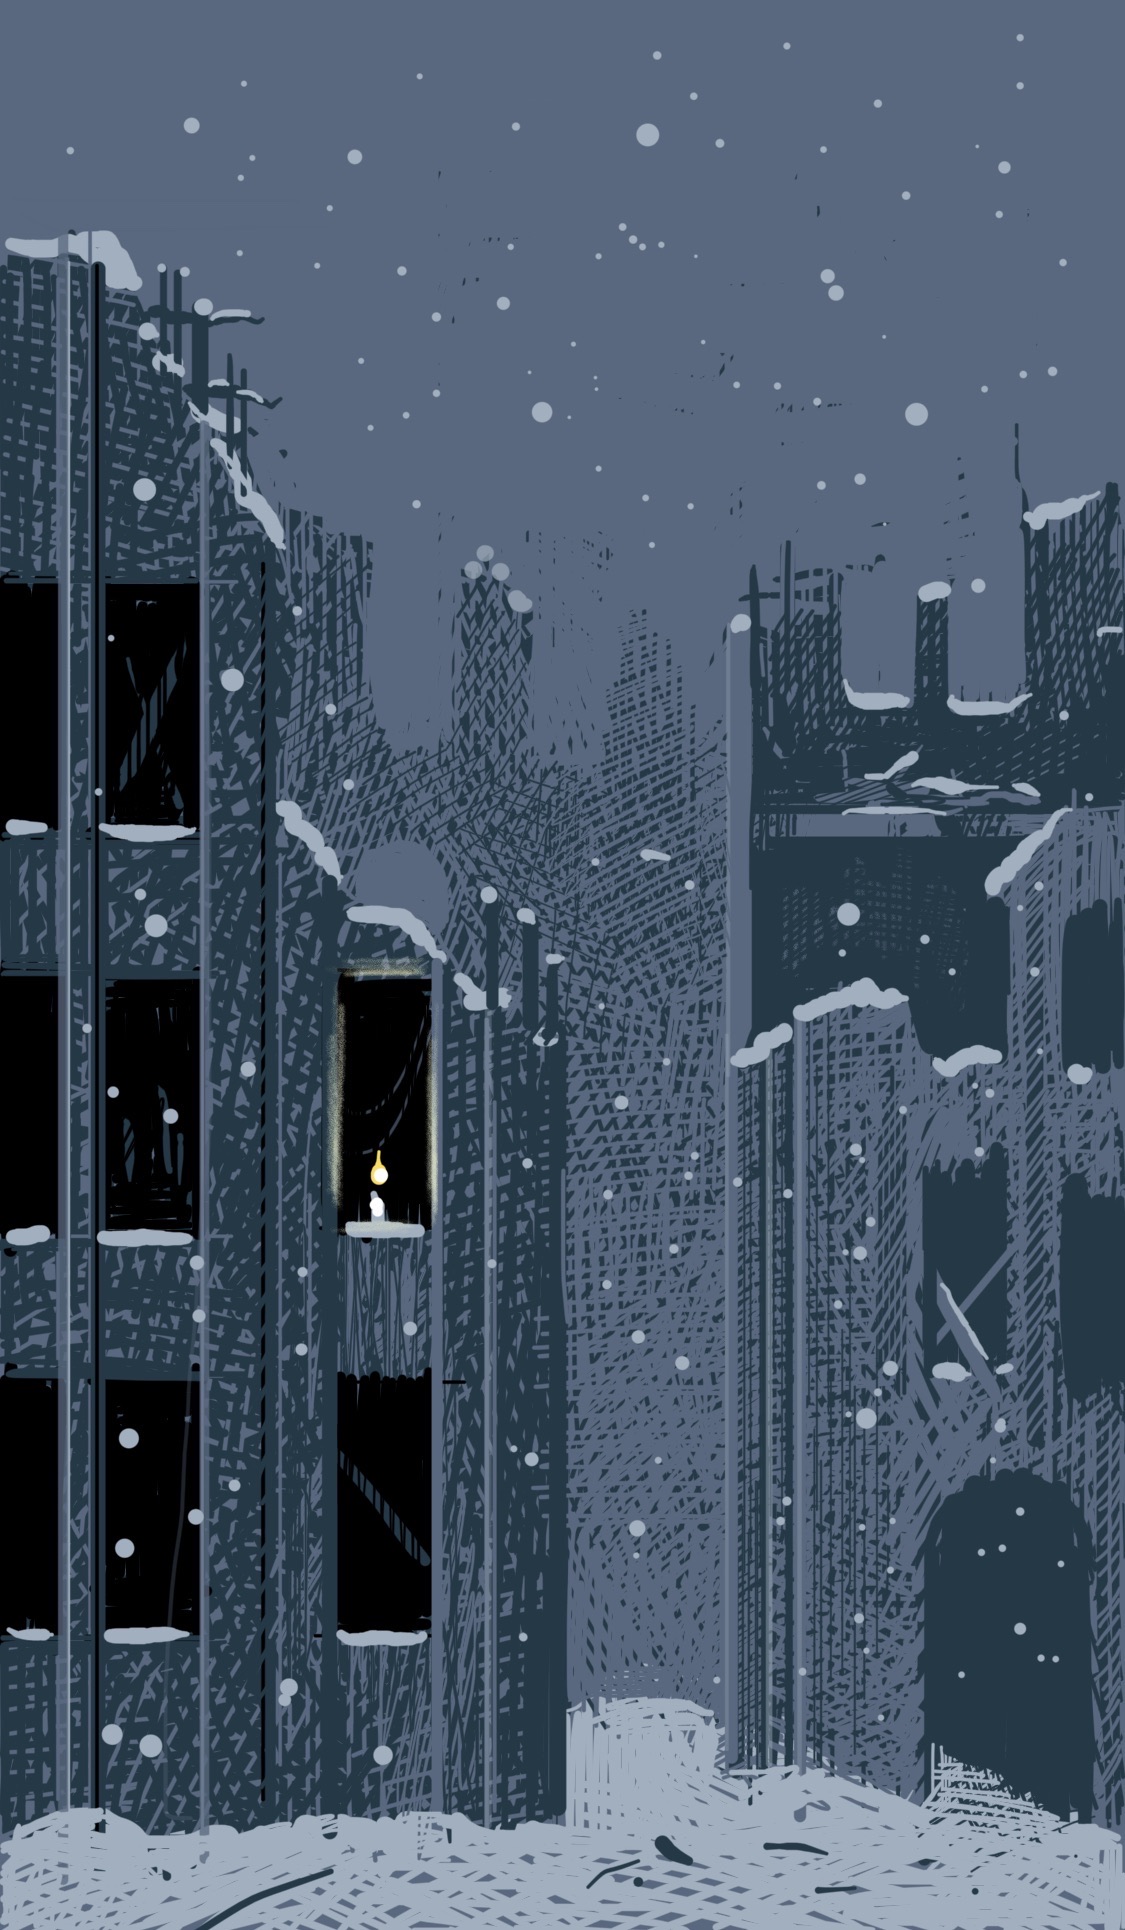 A photo of a destroyed city: ruined, snow-covered shells of buildings. A single candle burns in one window.